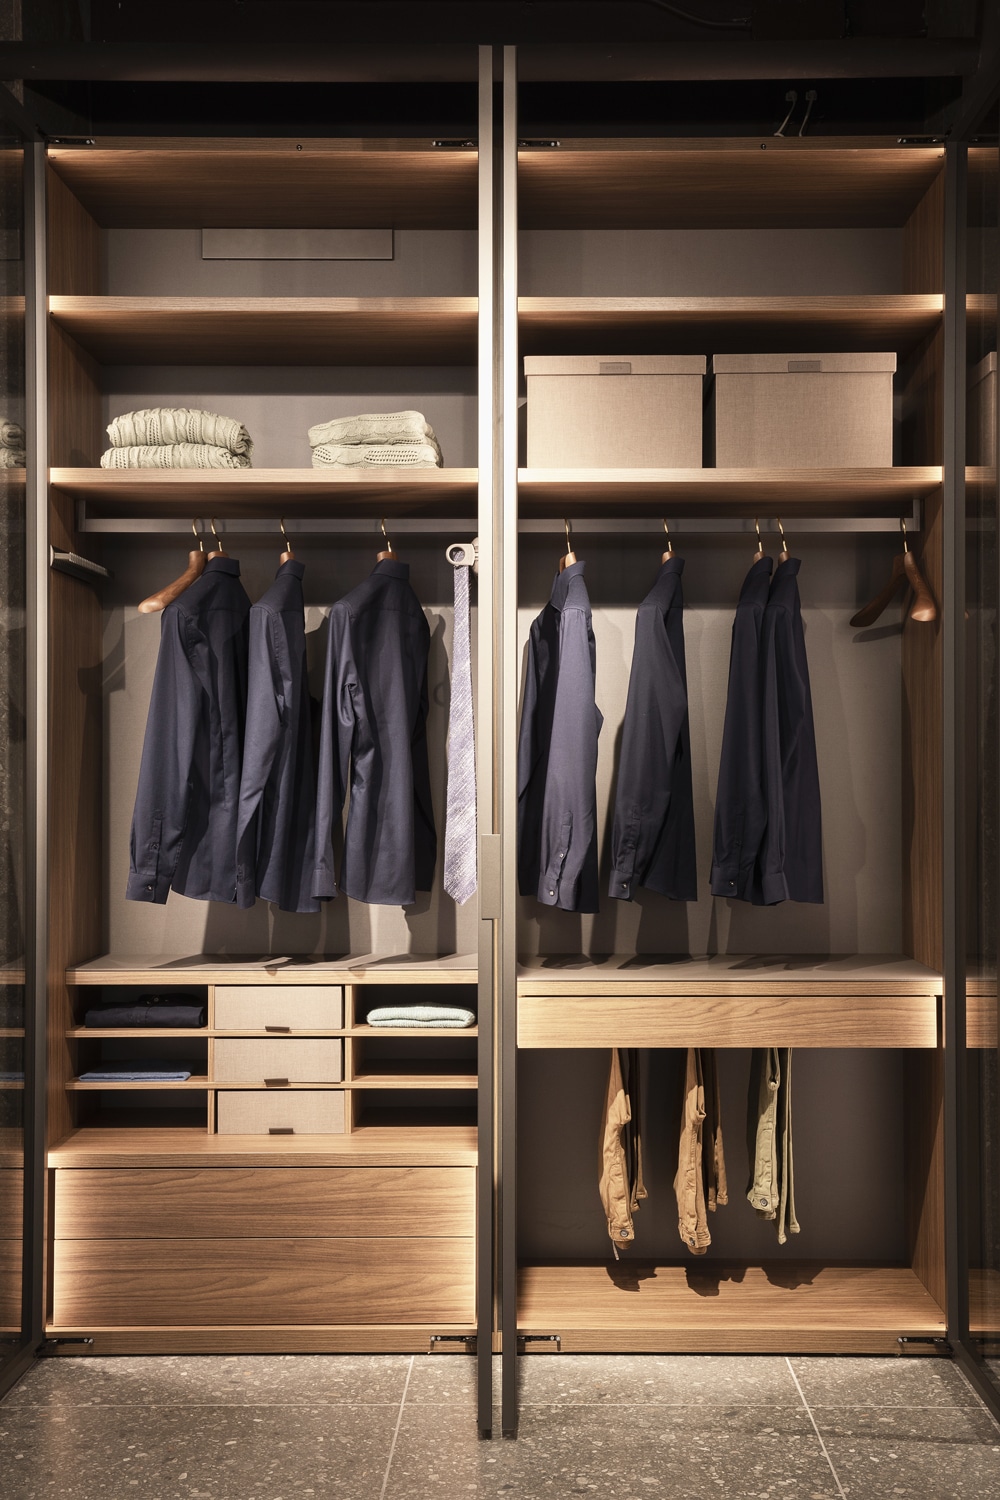 The modules can match the finishes of the rest of the walk-in closet and be customized with hanging rails, drawers and shelf grids with extractable fabric trays.